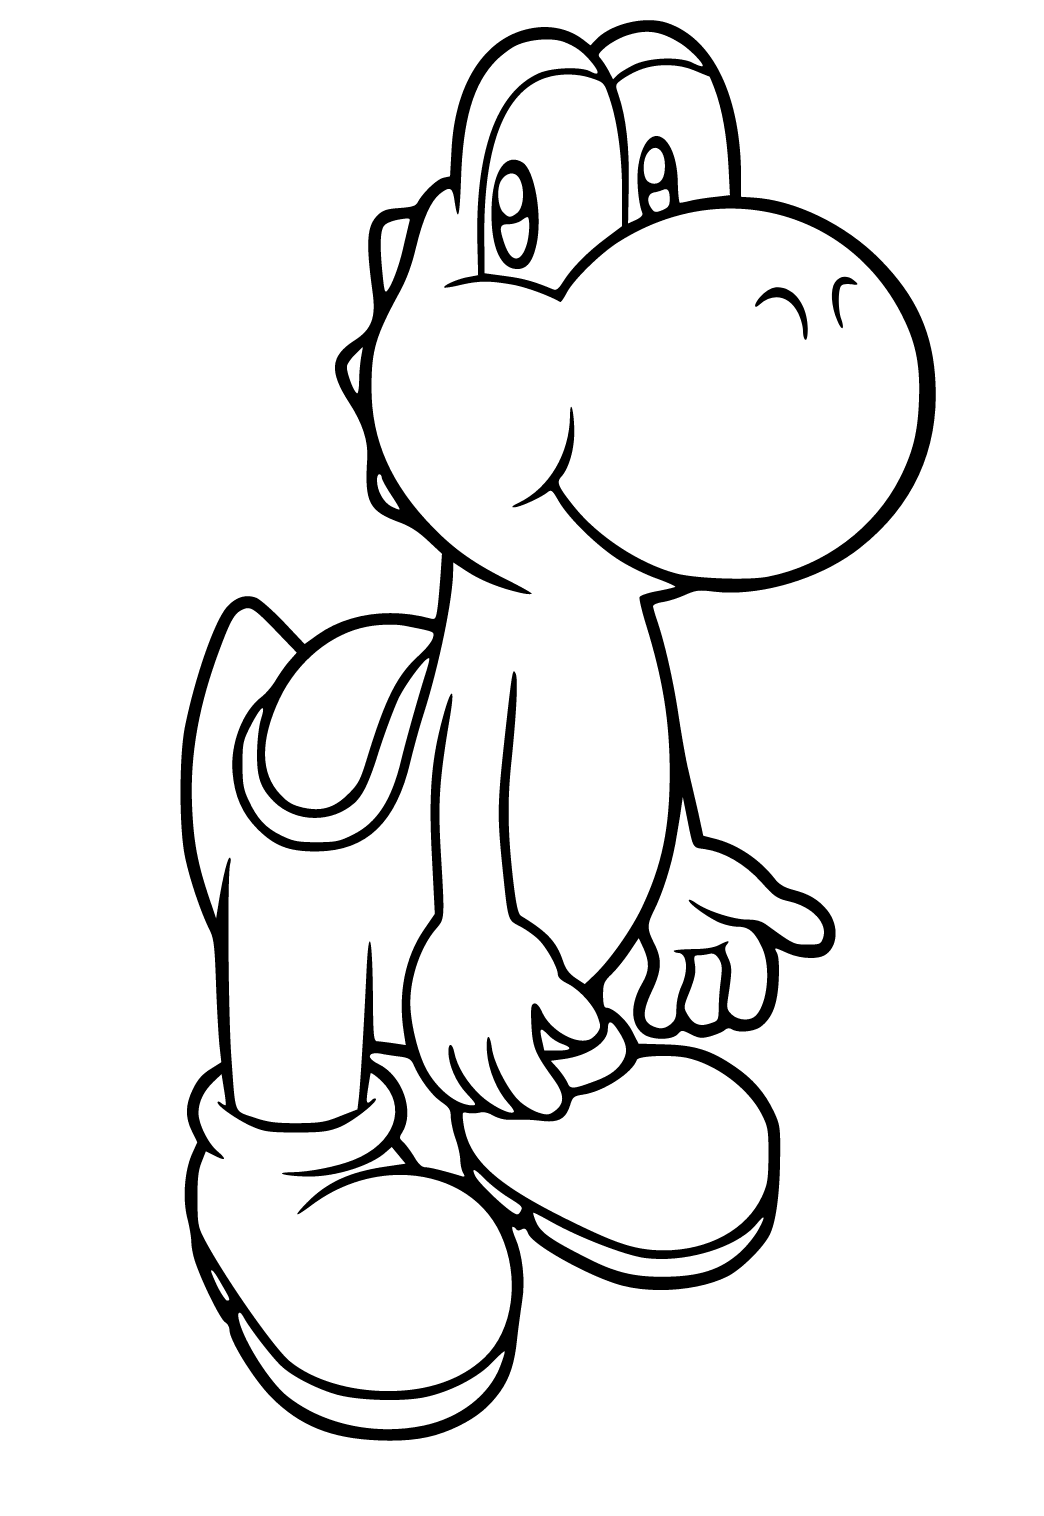 Free printable yoshi cute coloring page for adults and kids